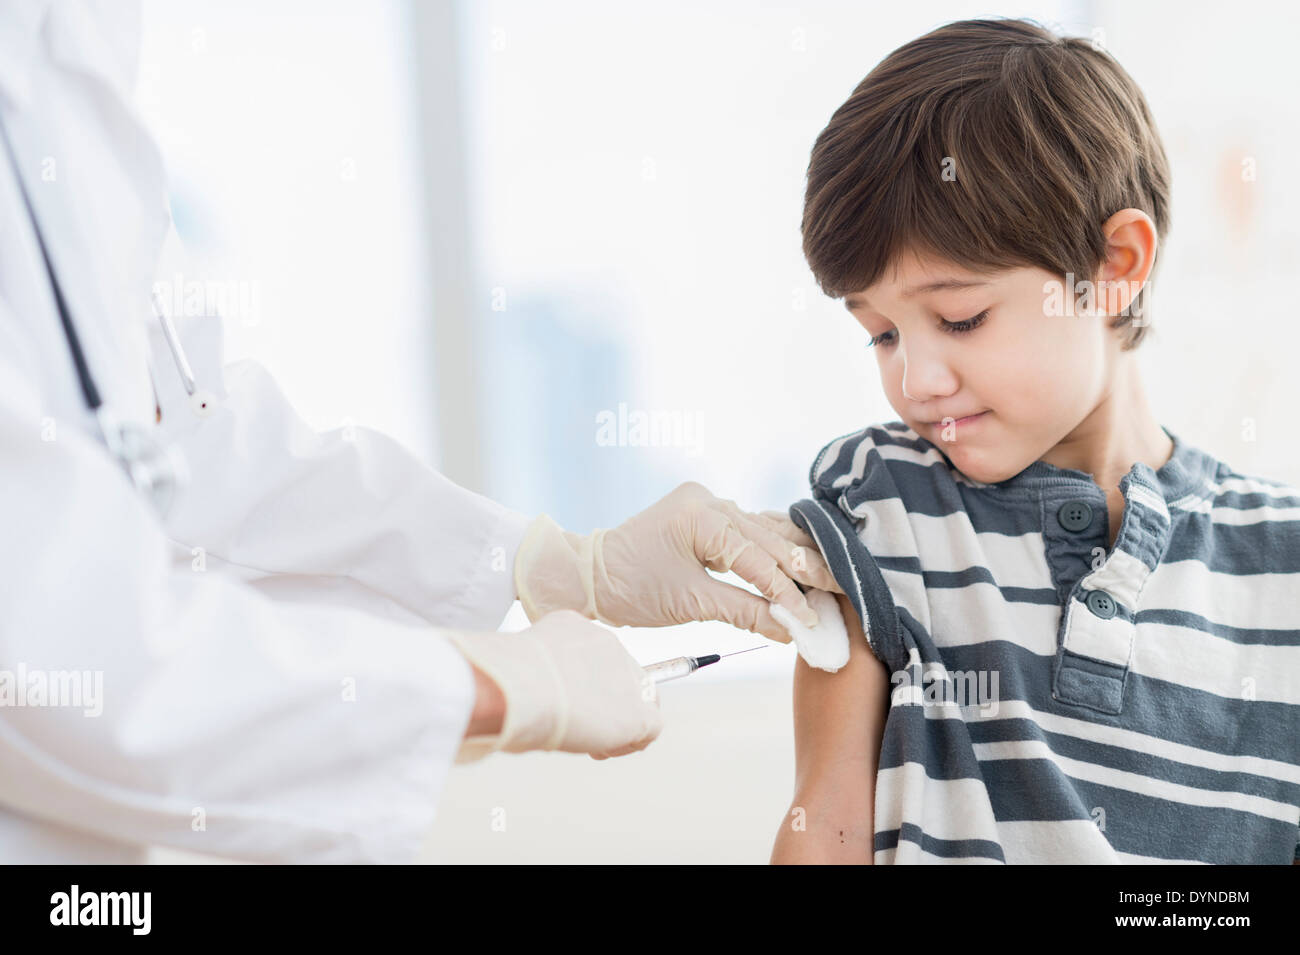 Hispanic boy getting a shot at doctor's office Stock Photo